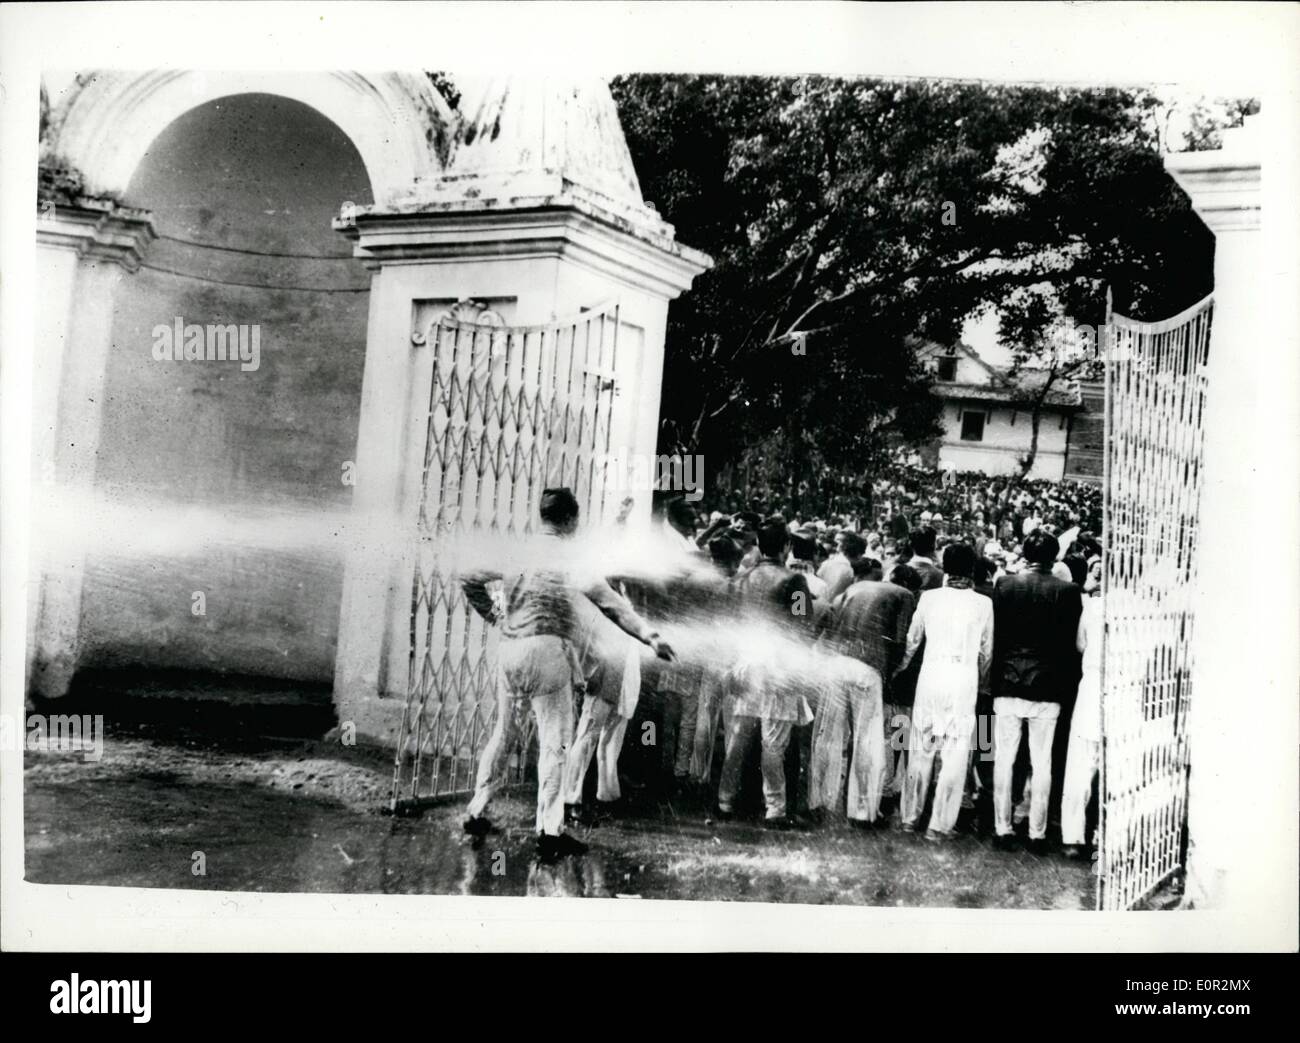 Dec. 12, 1957 - Civil Disobedience Movement in Nepal... Nepal's biggest political alliance of three progressive parties - launched a Civil Disobedience Movement - in a non violent form - in support of their demands for an early general election. Keystone Photo Shows: Members of the fire brigade hosing the pickets which formed outside the gate of the Secretariat... The pickets stood their ground. The police removed the pickets and released them from custody after about two hours. Stock Photo